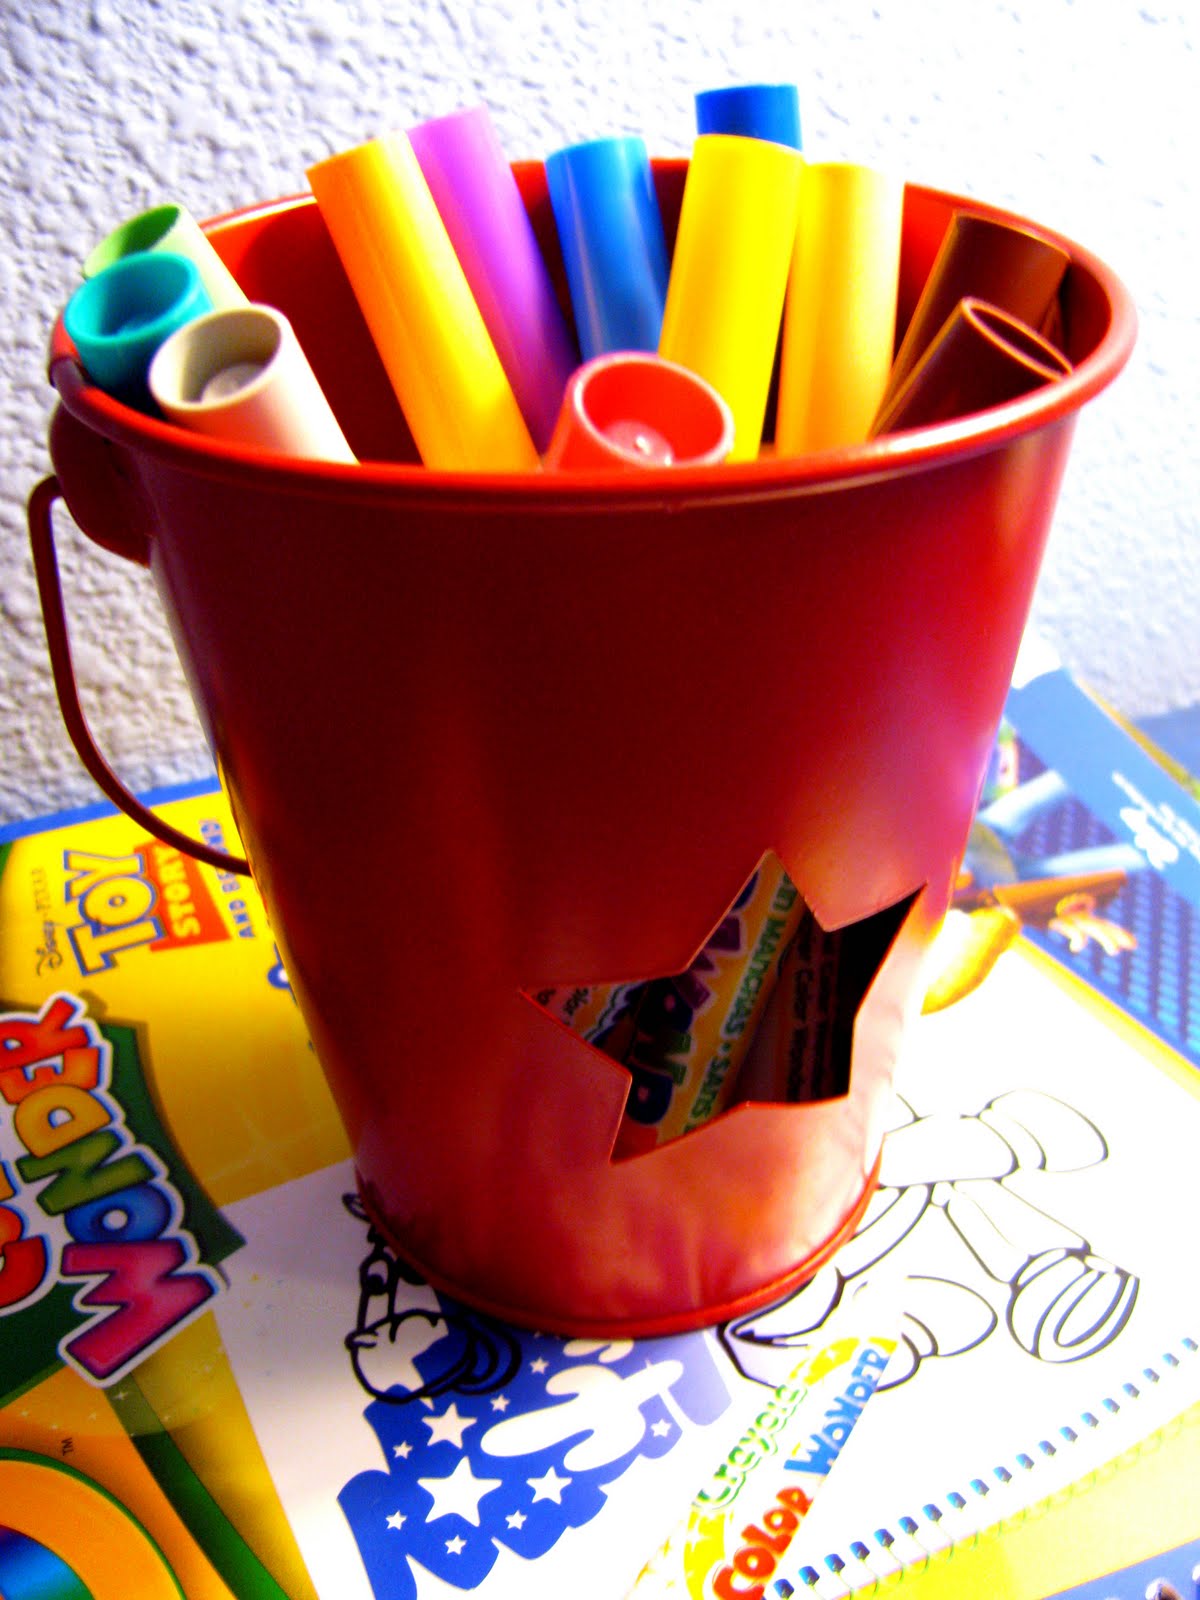 IHeart Organizing: March Featured Space: Kids - Color Your World